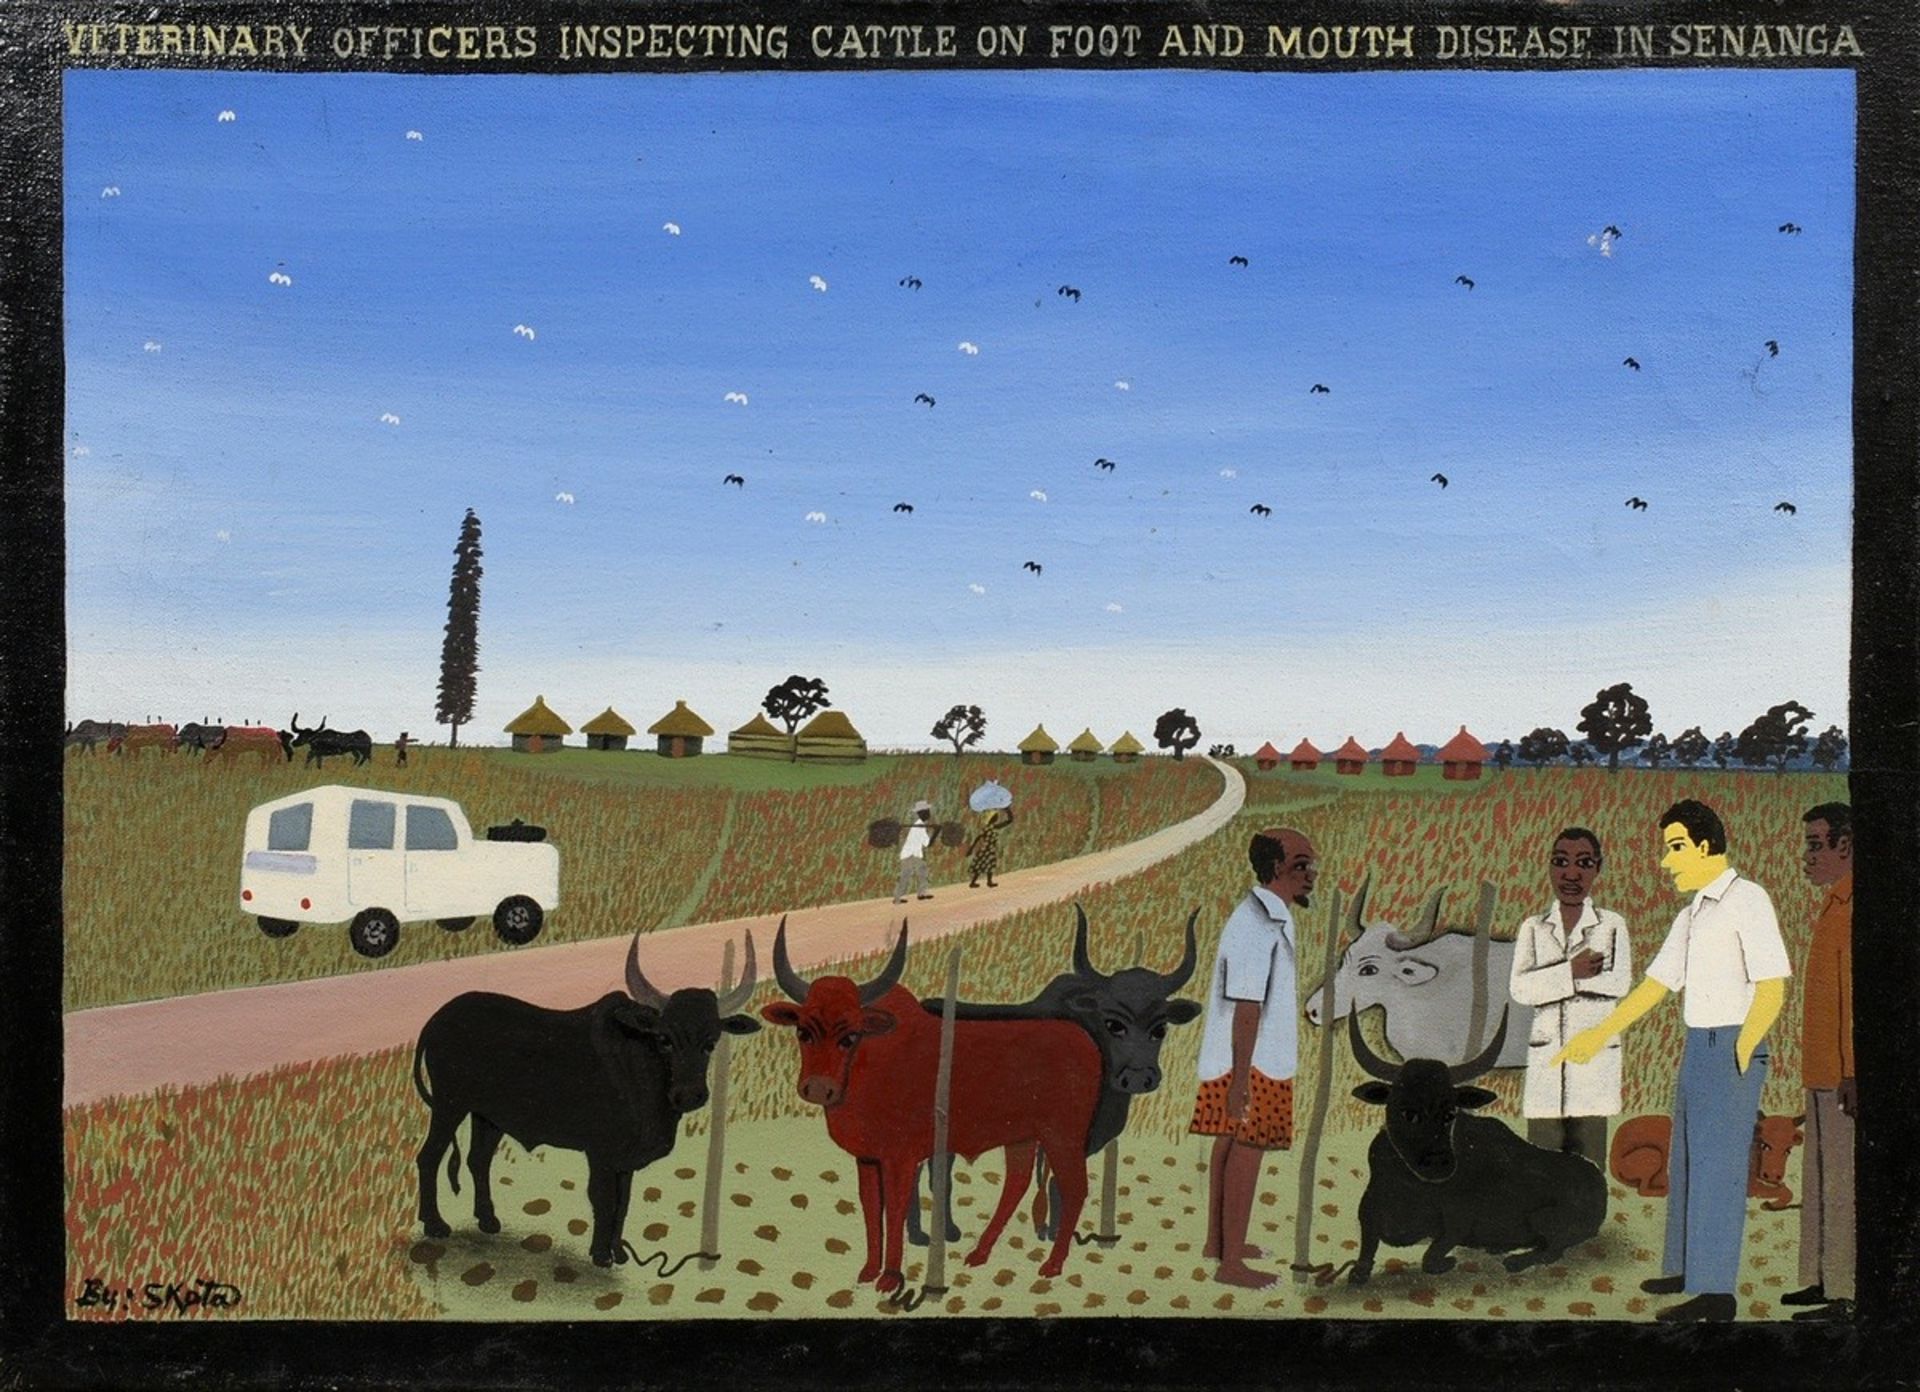 Kappata, Stephen (1936-2007) "Veterinary Officers inspecting cattle on foot and mouth disease in Se